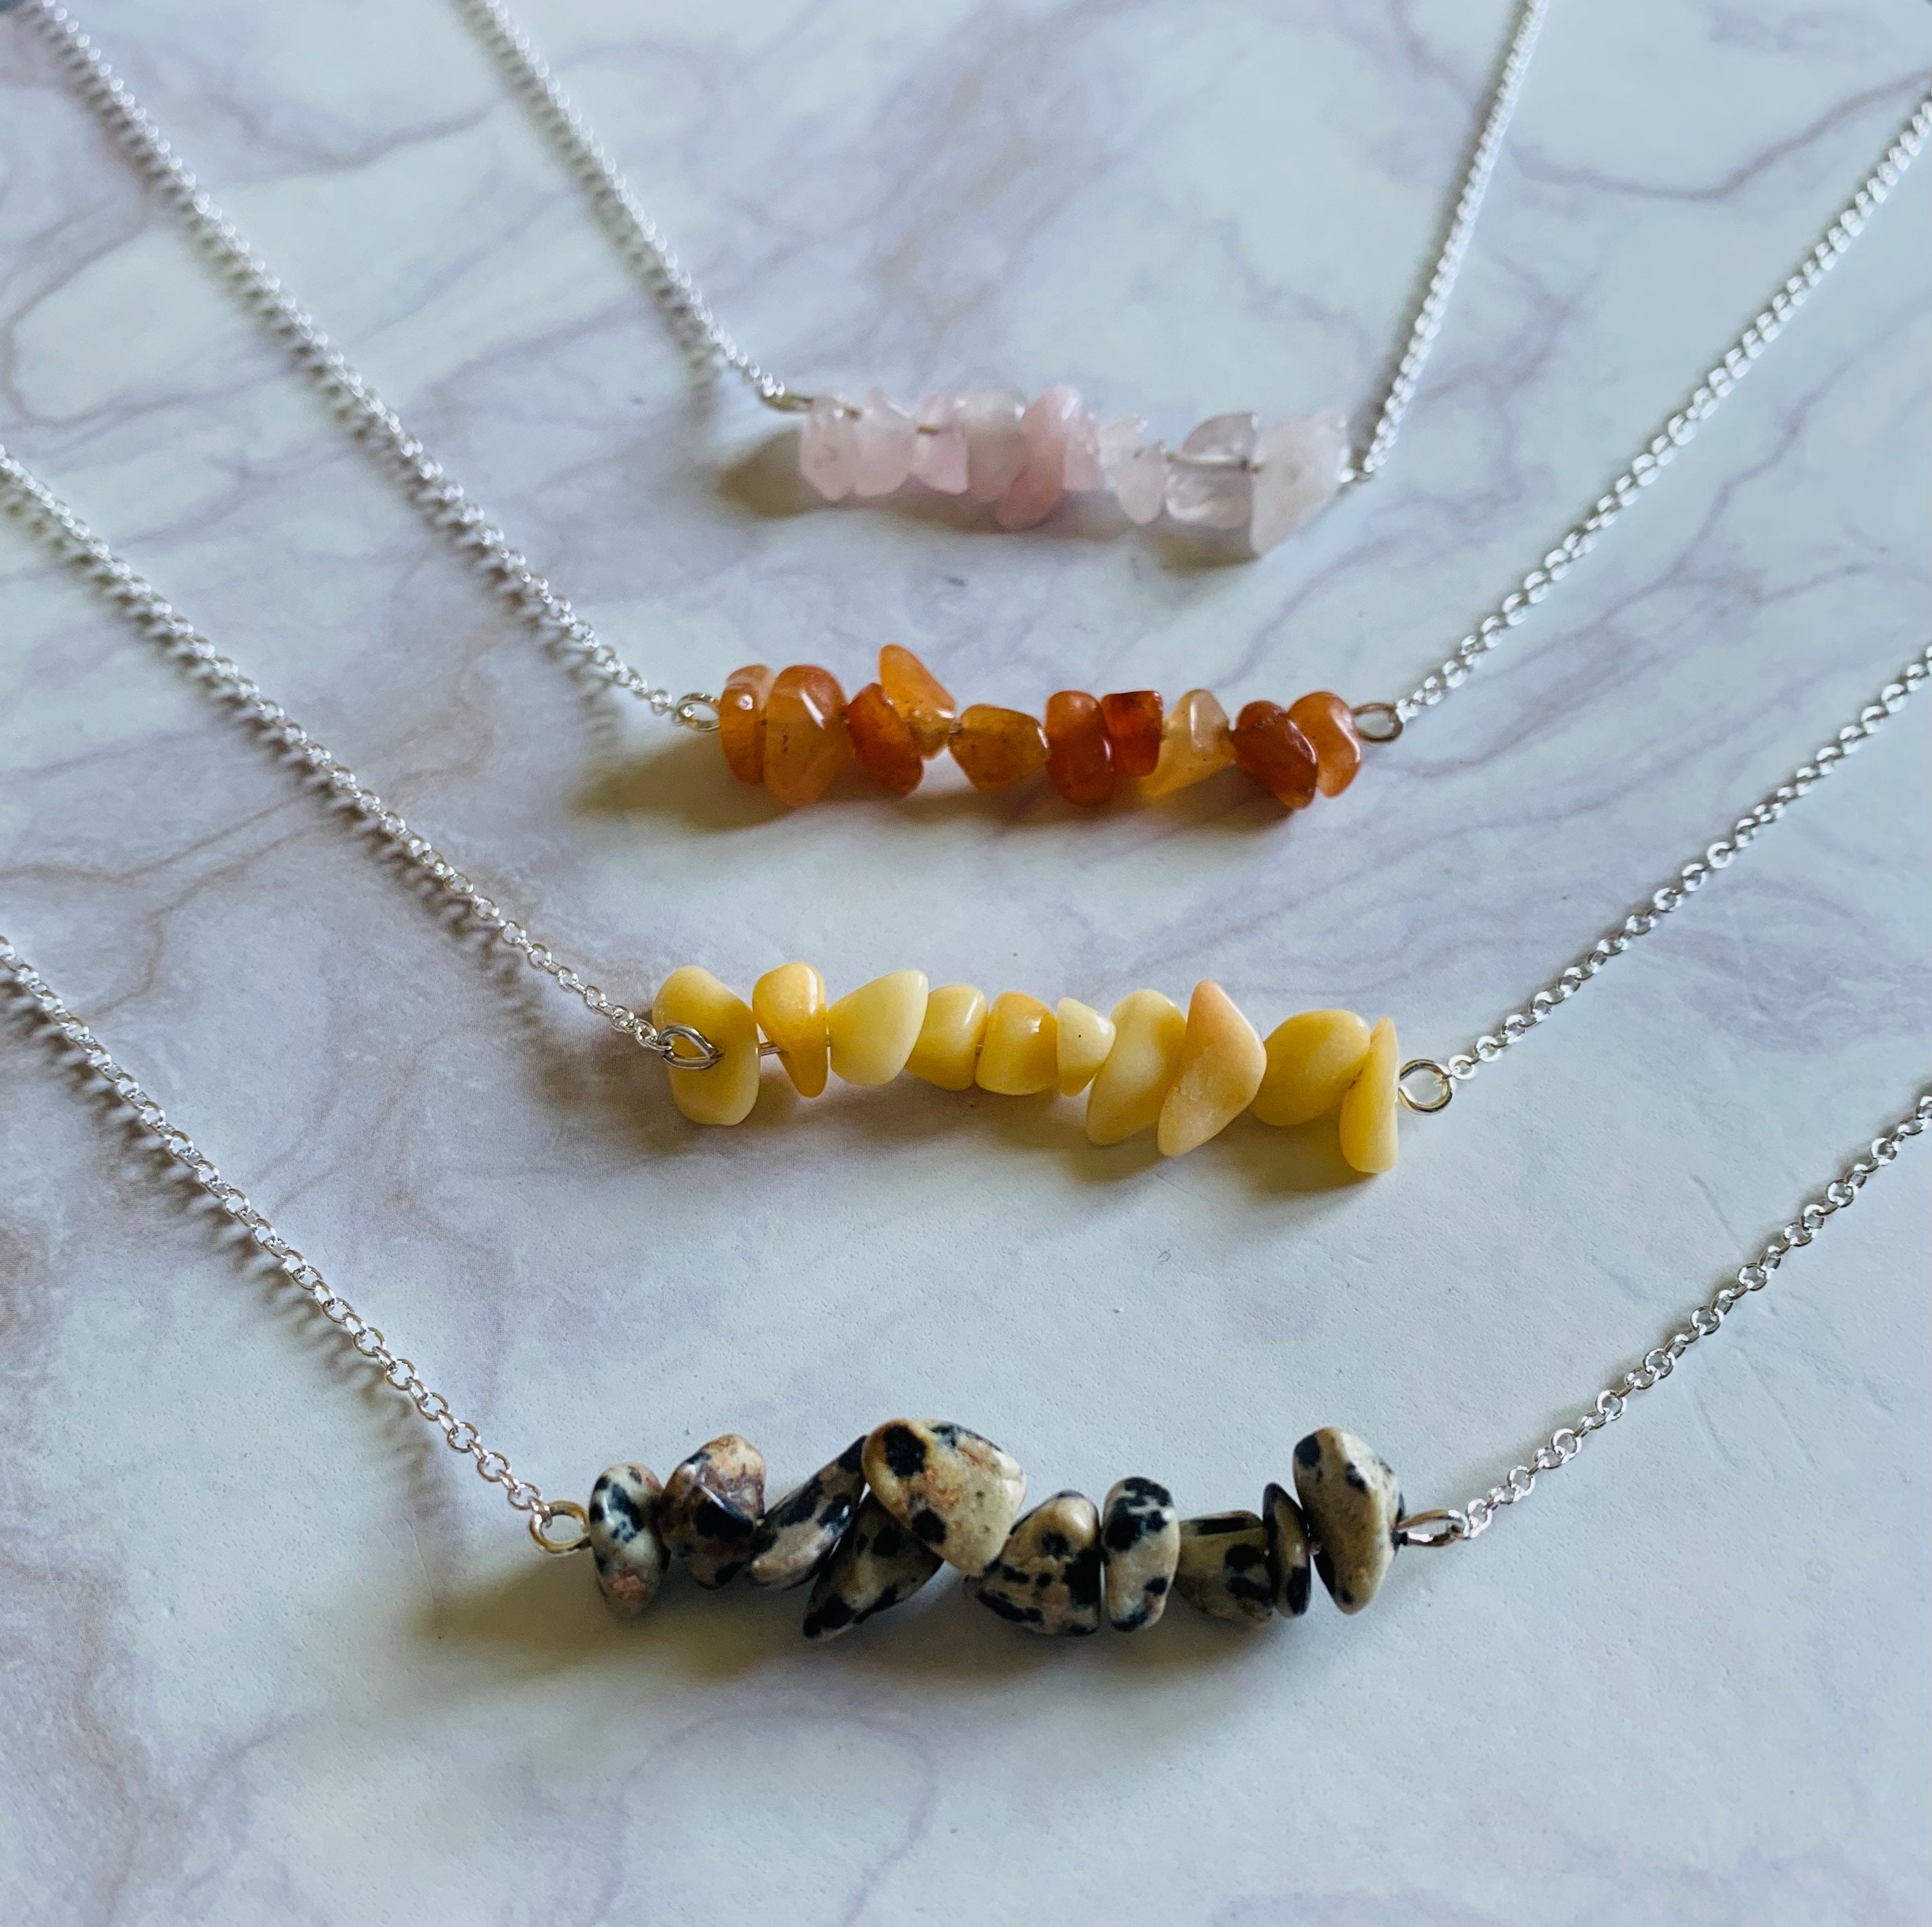 Gemstone Chip Necklaces Gemstone Chip Beads With Silver Etsy